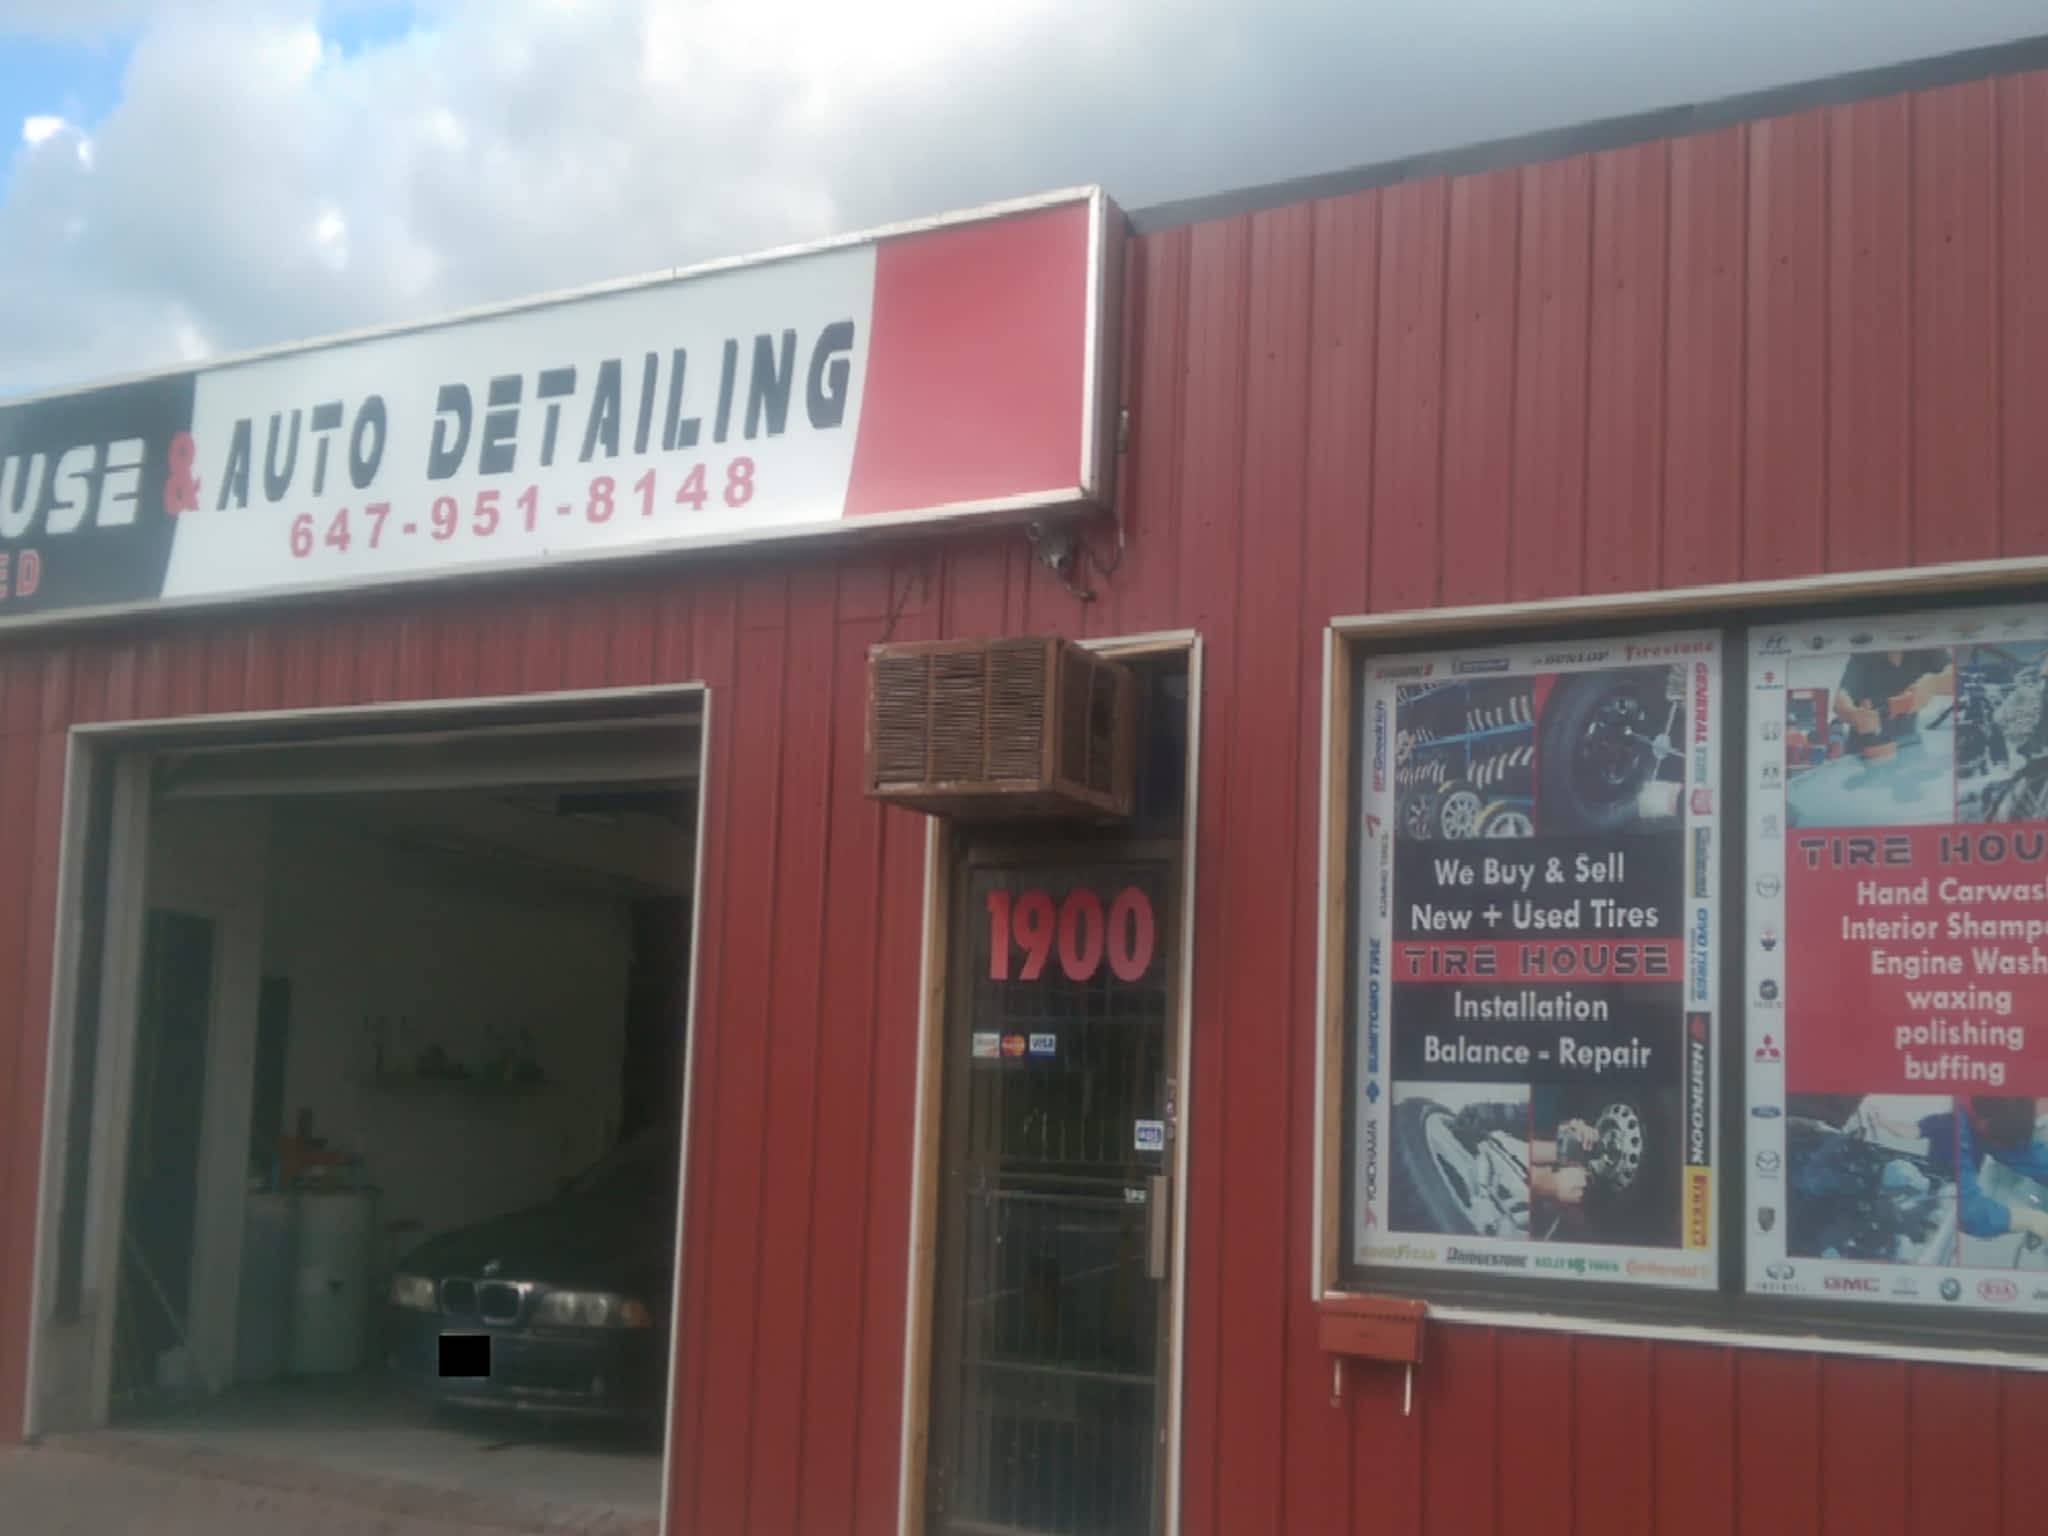 photo Tire House and Auto Detailing